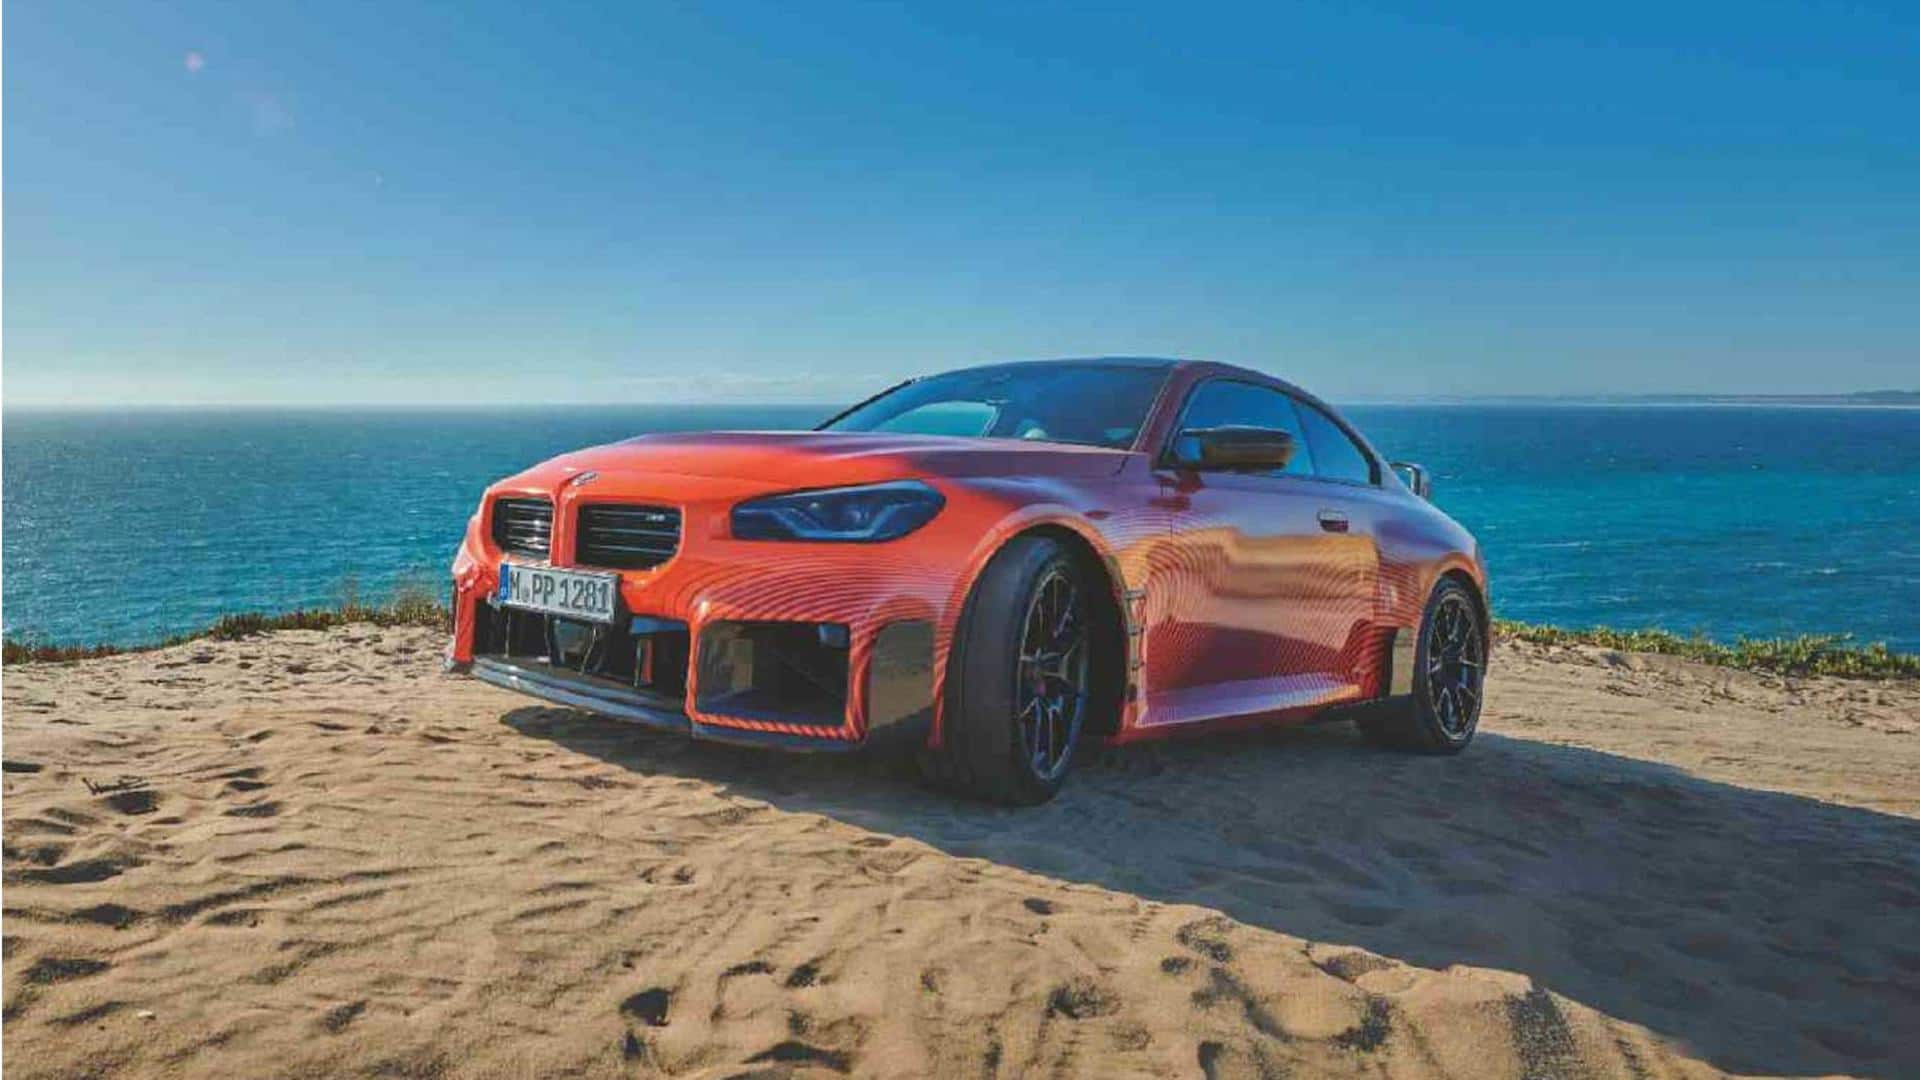 BMW M2, with M performance kit, to be showcased tomorrow